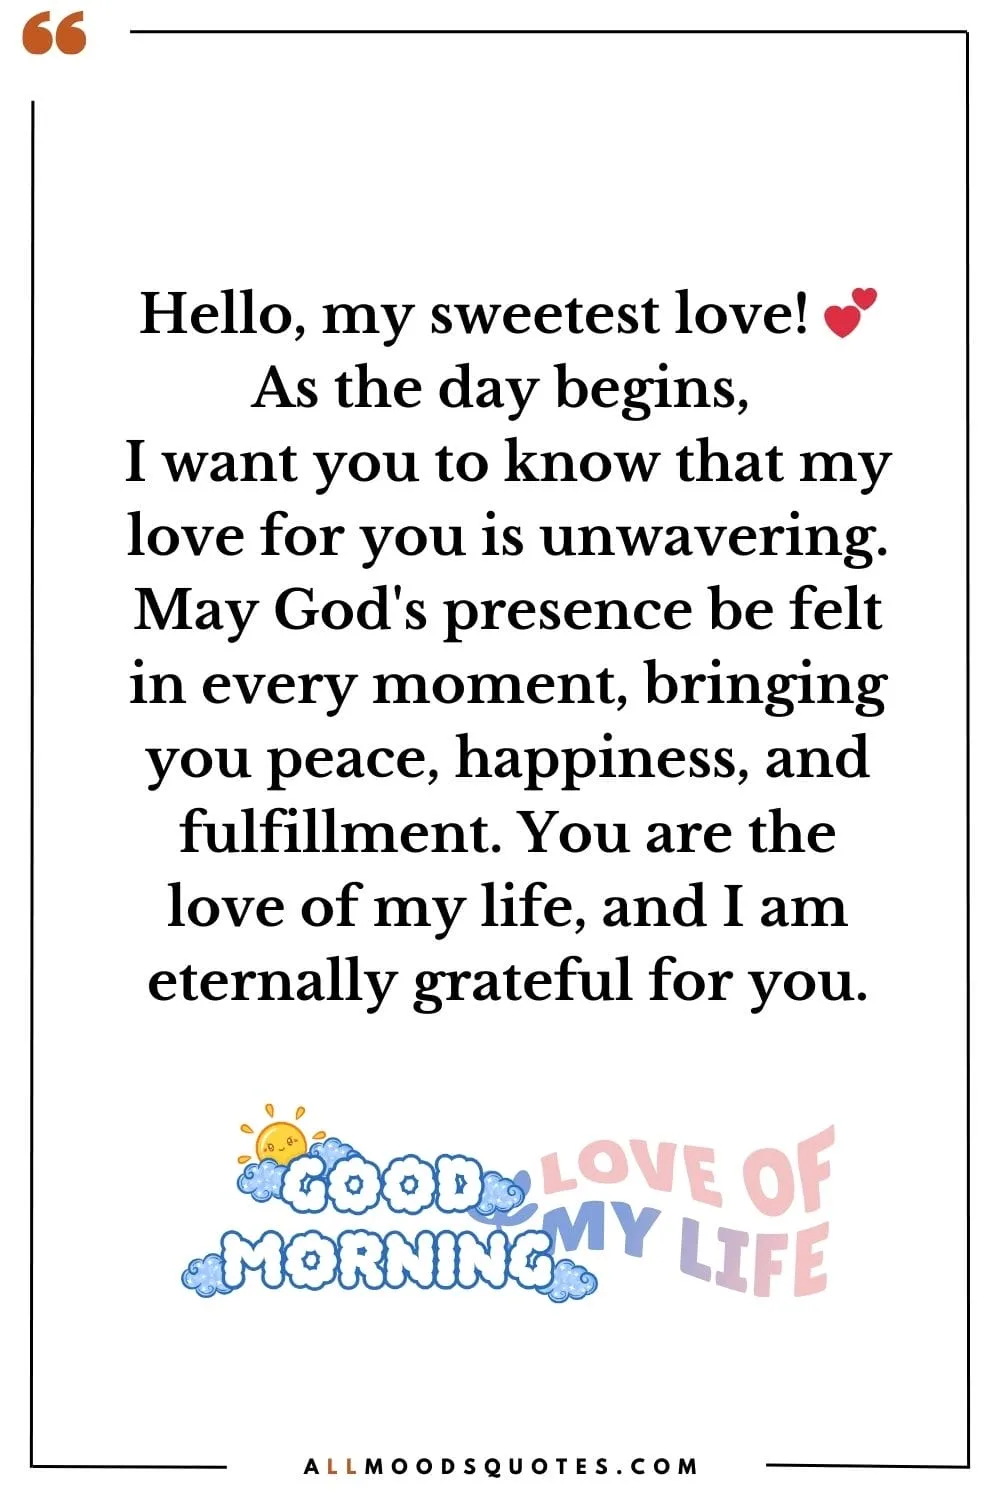 Hello, my sweetest love! 💕 As the day begins, I want you to know that my love for you is unwavering. May God's presence be felt in every moment, bringing you peace, happiness, and fulfillment. You are the love of my life, and I am eternally grateful for you.